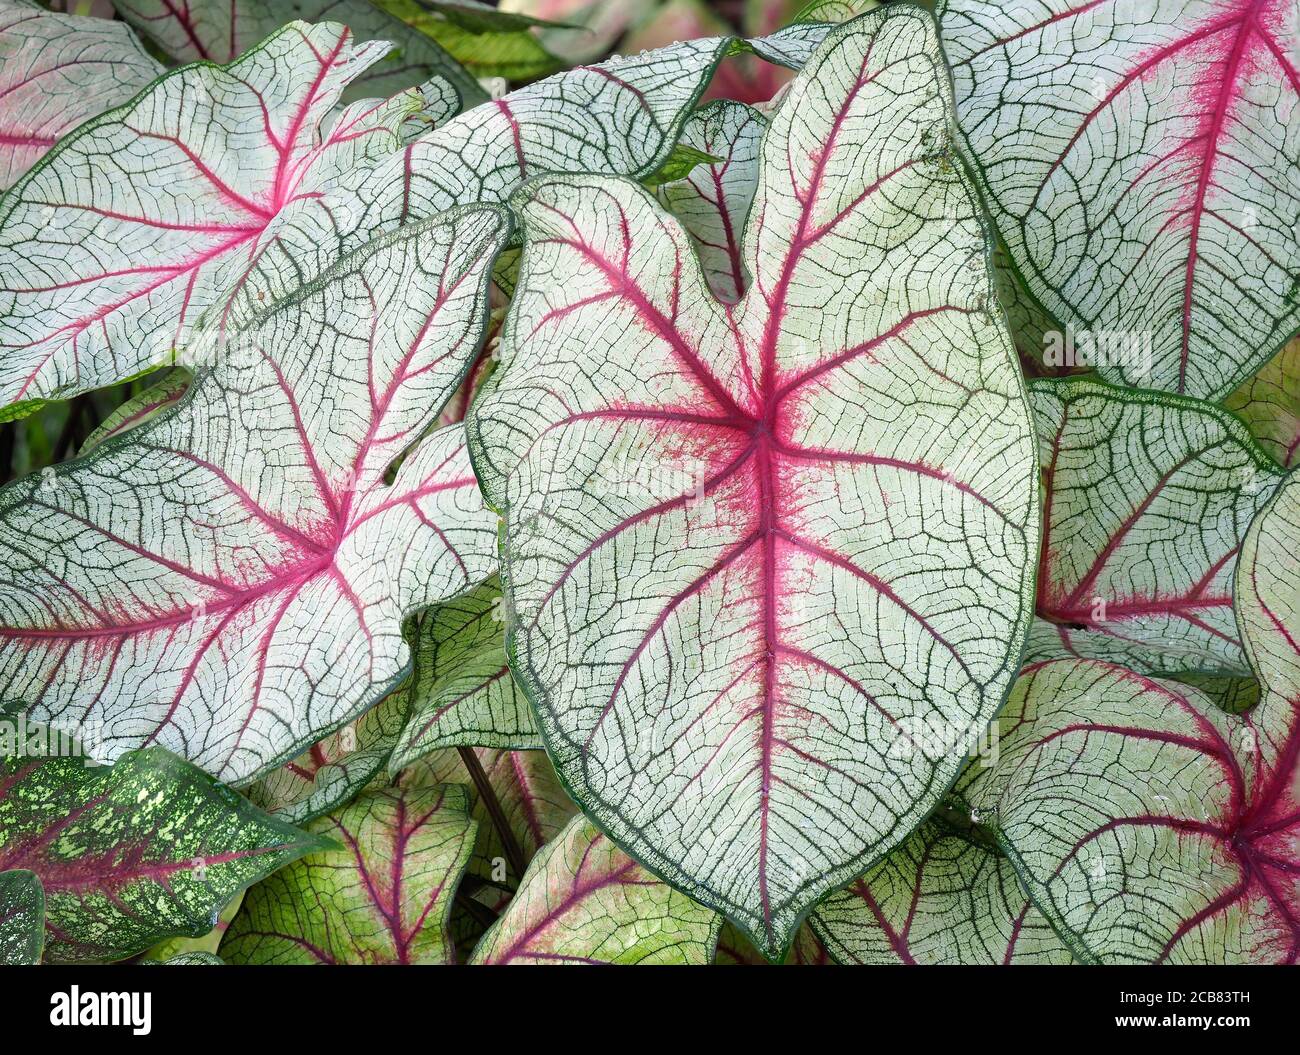 A Closeup Focus Stacked Image of Tropical Caladium in a Florida Landscape Stock Photo